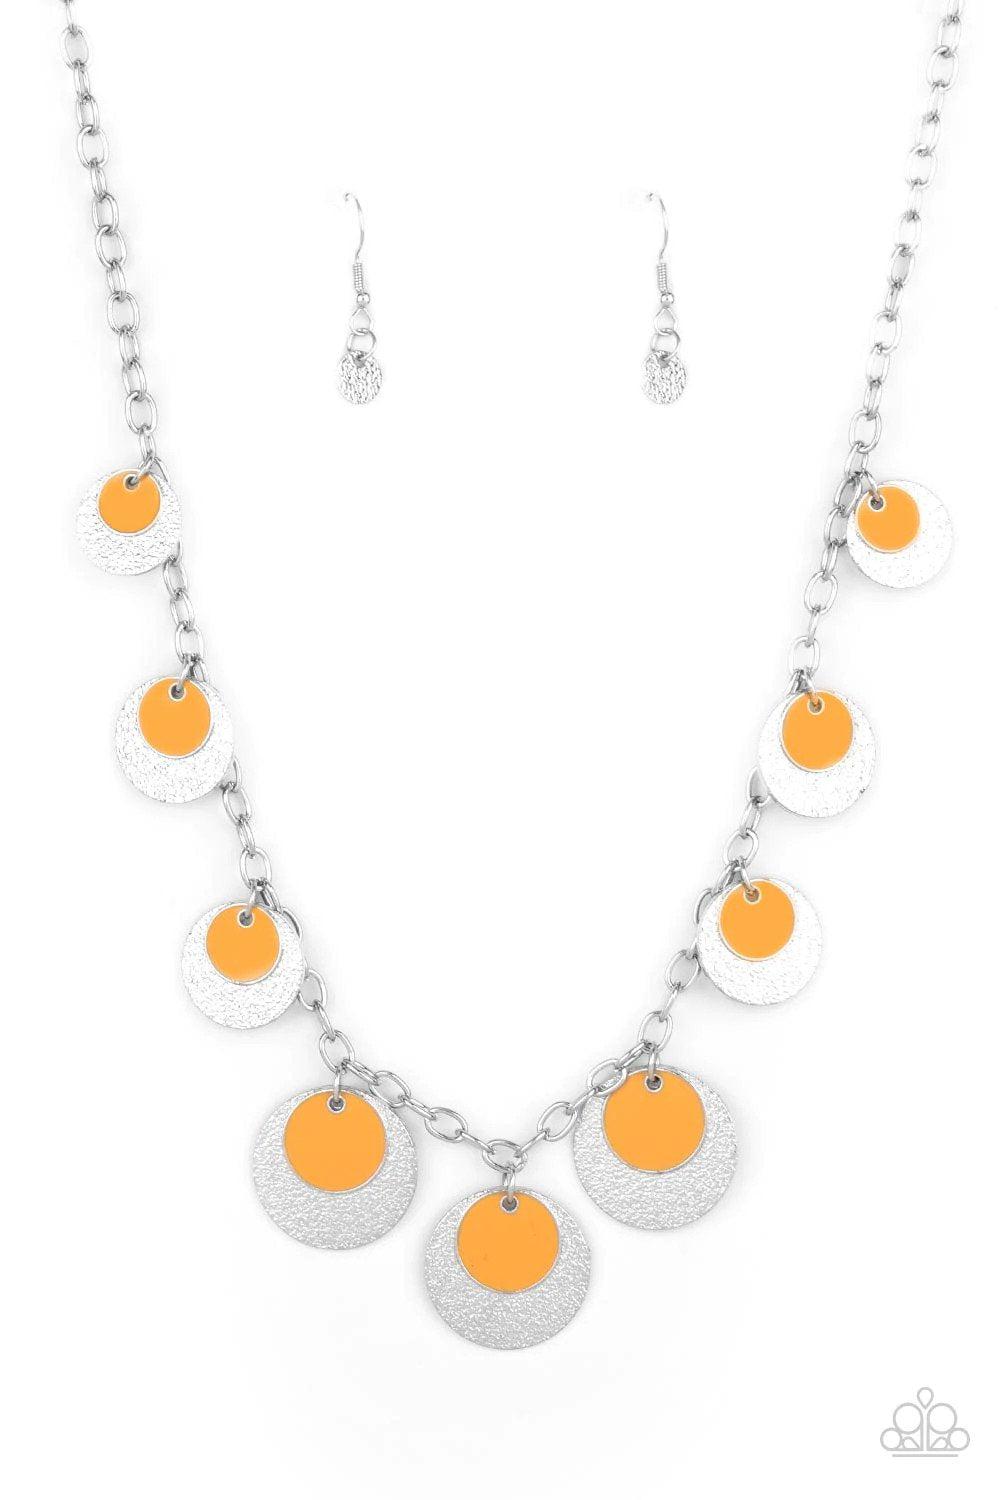 The Cosmos Are Calling Orange Necklace - Paparazzi Accessories- lightbox - CarasShop.com - $5 Jewelry by Cara Jewels